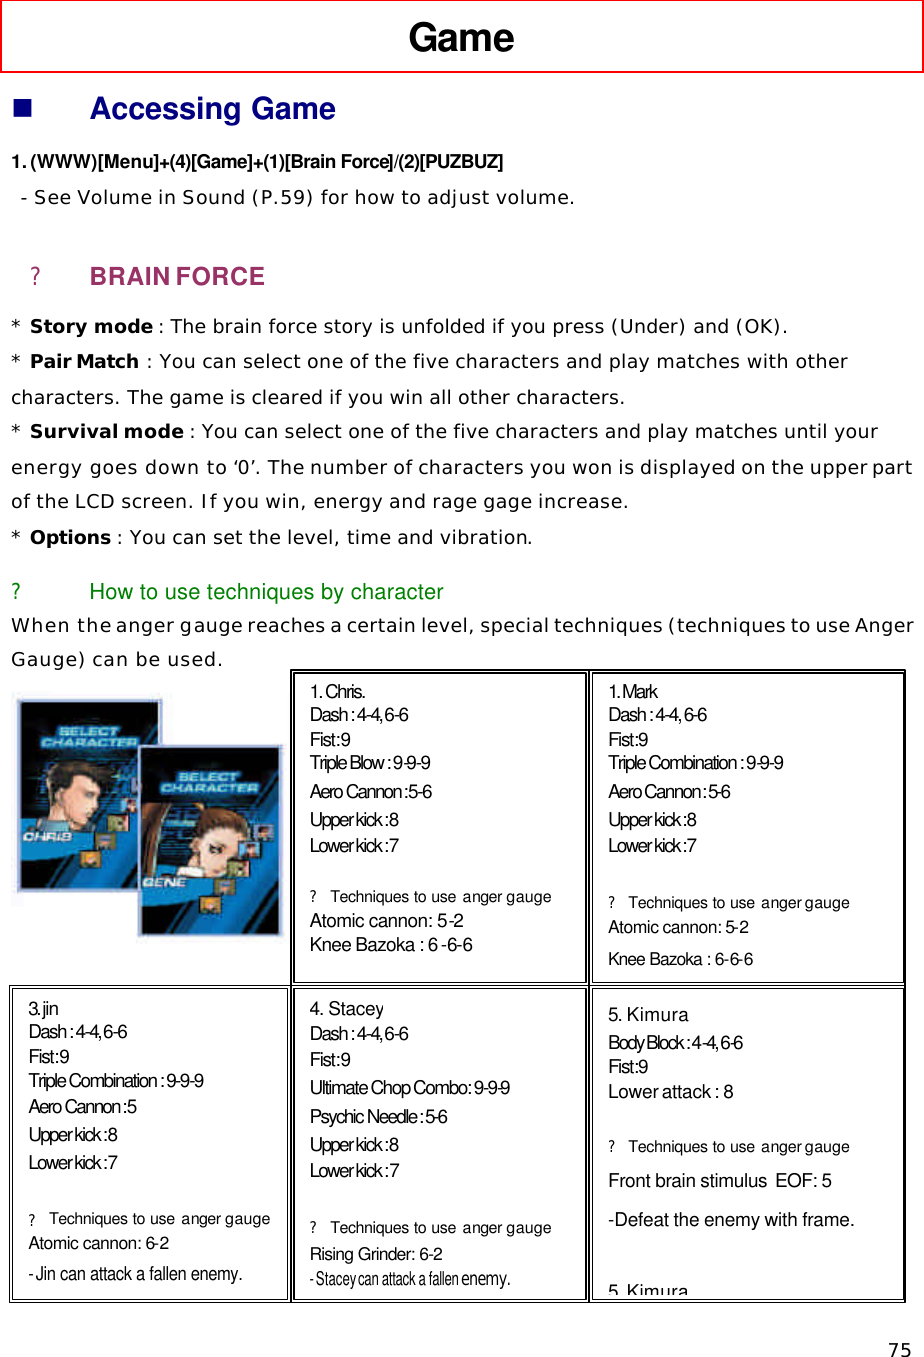   75 Game   n Accessing Game 1. (WWW)[Menu]+(4)[Game]+(1)[Brain Force]/(2)[PUZBUZ]  - See Volume in Sound (P.59) for how to adjust volume. ? BRAIN FORCE * Story mode : The brain force story is unfolded if you press (Under) and (OK). * Pair Match : You can select one of the five characters and play matches with other characters. The game is cleared if you win all other characters. * Survival mode : You can select one of the five characters and play matches until your energy goes down to ‘0’. The number of characters you won is displayed on the upper part of the LCD screen. If you win, energy and rage gage increase.  * Options : You can set the level, time and vibration. ? How to use techniques by character When the anger gauge reaches a certain level, special techniques (techniques to use Anger Gauge) can be used.               1. Chris.  Dash : 4-4, 6-6 Fist : 9 Triple Blow : 9-9-9 Aero Cannon :  5-6 Upper kick : 8 Lower kick : 7  ? Techniques to use anger  gauge Atomic cannon: 5-2 Knee Bazoka : 6 -6-6  1. Mark  Dash : 4-4, 6-6 Fist : 9  Triple Combination : 9-9-9 Aero Cannon : 5-6 Upper kick : 8  Lower kick : 7   ? Techniques to use anger gauge Atomic cannon: 5-2 Knee Bazoka : 6-6-6 3. jin Dash : 4-4, 6-6 Fist : 9 Triple Combination : 9-9-9 Aero Cannon :  5 Upper kick : 8 Lower kick : 7  ? Techniques to use anger  gauge Atomic cannon: 6-2 - Jin can attack a fallen enemy. 4. Stacey Dash : 4-4, 6-6 Fist : 9 Ultimate Chop Combo: 9-9-9 Psychic Needle : 5-6 Upper kick : 8 Lower kick : 7  ? Techniques to use anger  gauge Rising Grinder: 6-2 - Stacey can attack a fallen enemy. 5. Kimura Body Block : 4-4, 6-6 Fist : 9  Lower attack : 8  ? Techniques to use anger gauge Front brain stimulus  EOF: 5 -Defeat the enemy with frame.  5. Kimura 